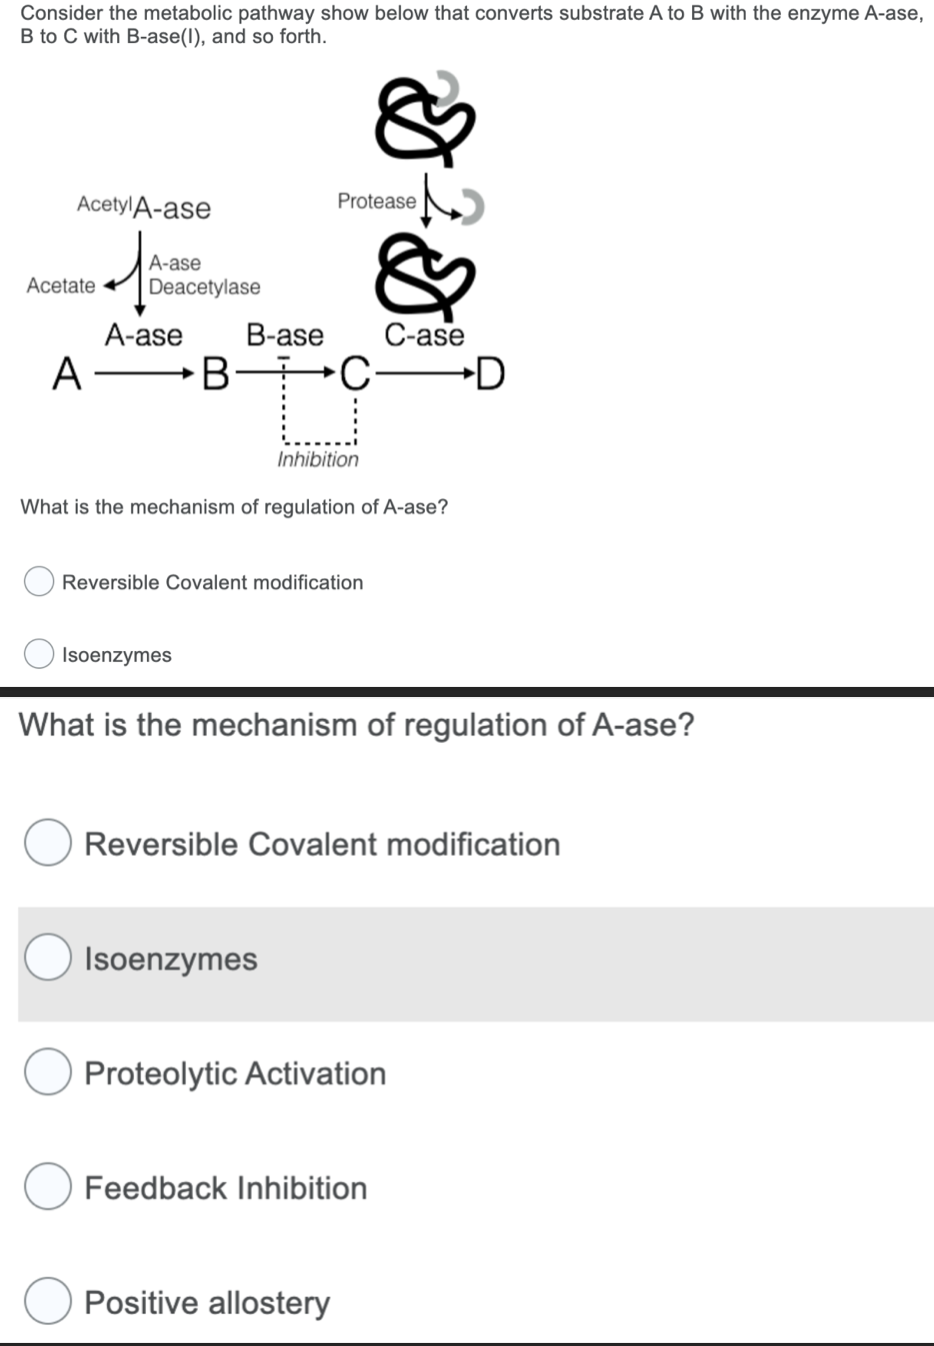 Consider the metabolic pathway show below that converts substrate A to B with the enzyme A-ase,
B to C with B-ase(I), and so forth.
Acetyl A-ase
Acetate
A-ase
Deacetylase
A-ase
B-ase
ABC-
Isoenzymes
Protease
Inhibition
What is the mechanism of regulation of A-ase?
Reversible Covalent modification
Isoenzymes
What is the mechanism of regulation of A-ase?
C-ase
Reversible Covalent modification
Proteolytic Activation
Feedback Inhibition
Positive allostery